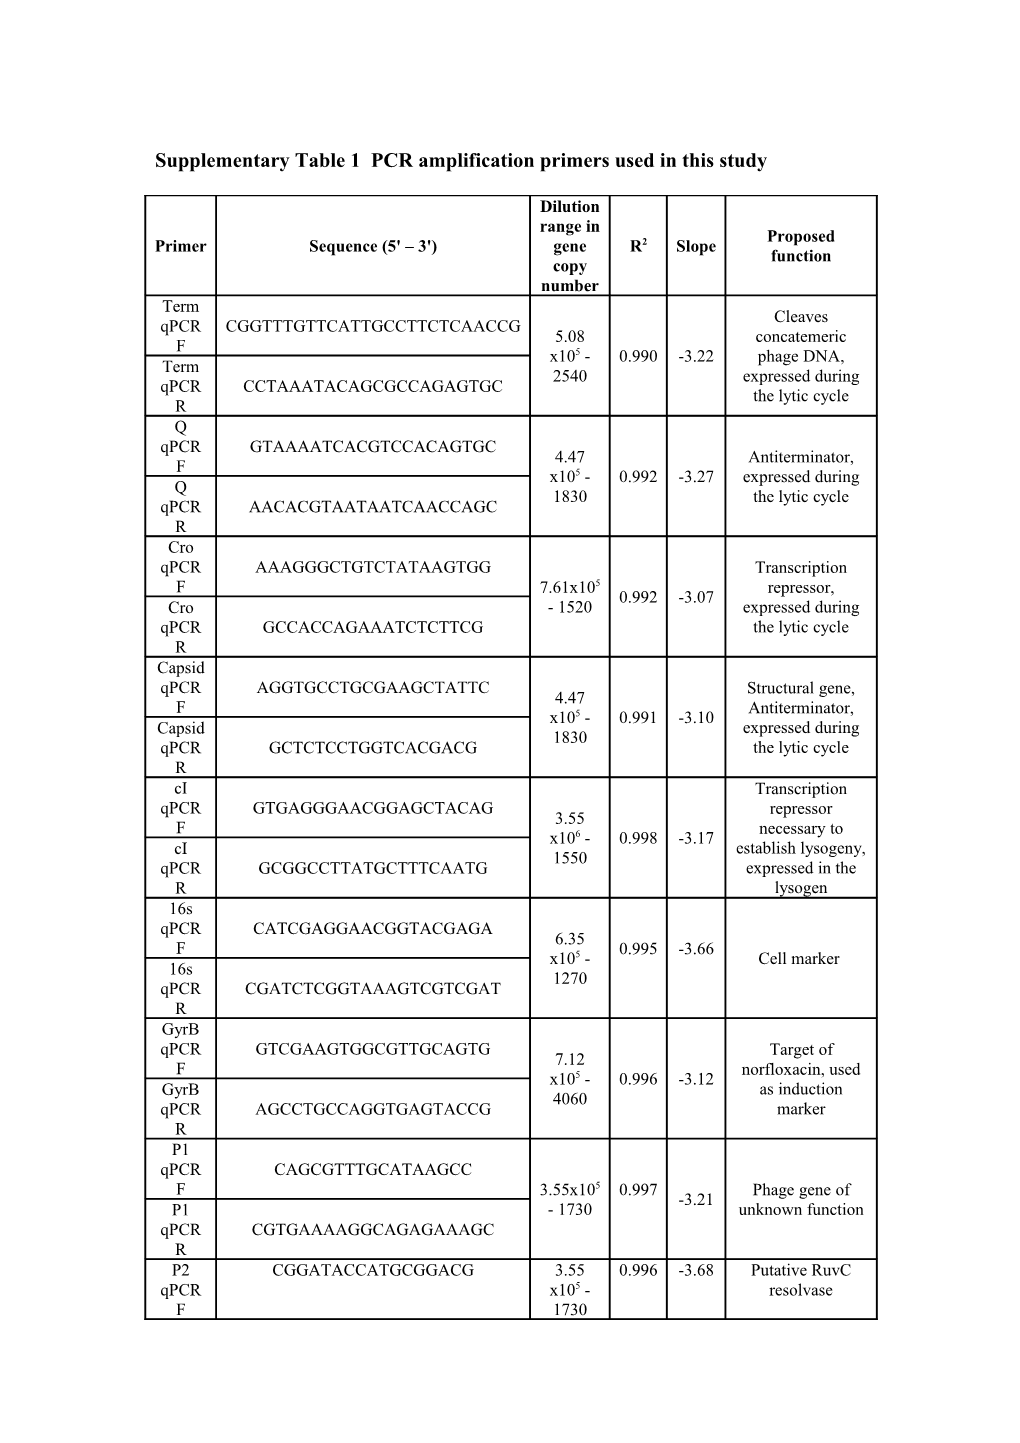 Supplementary Table 1 PCR Amplification Primers Used in This Study